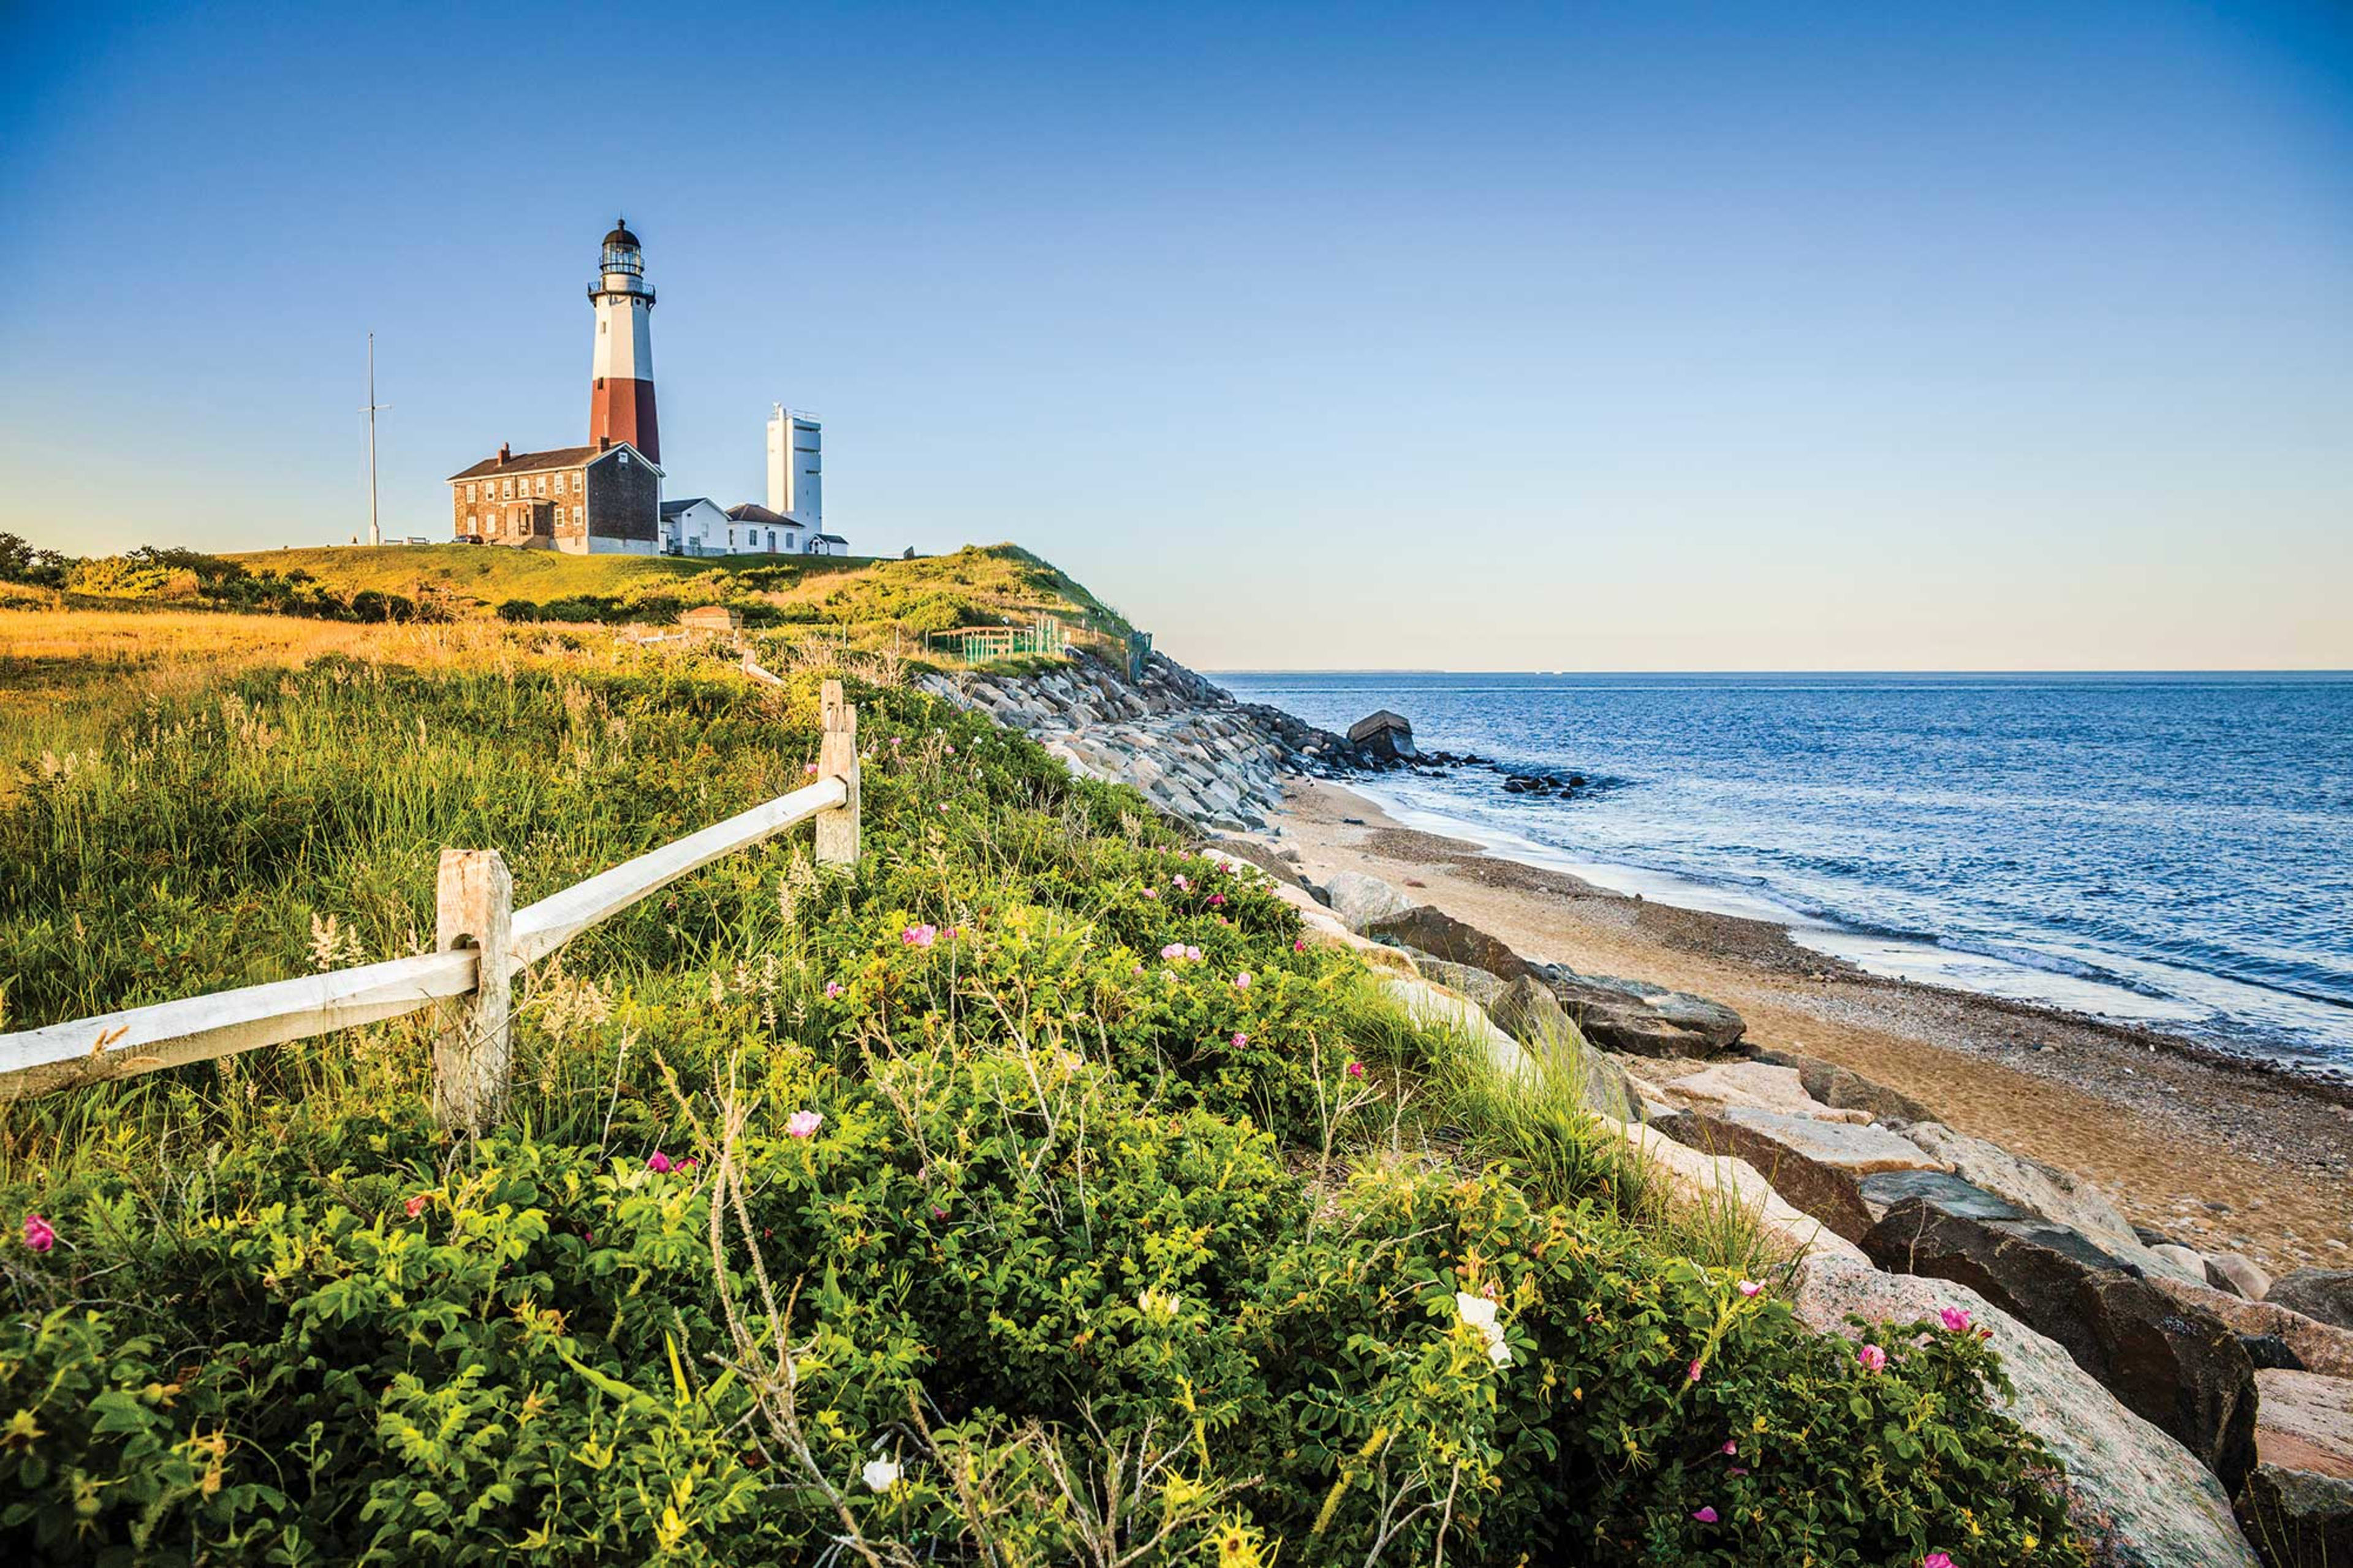 Seashore and lighthouse in Long Island, New York 